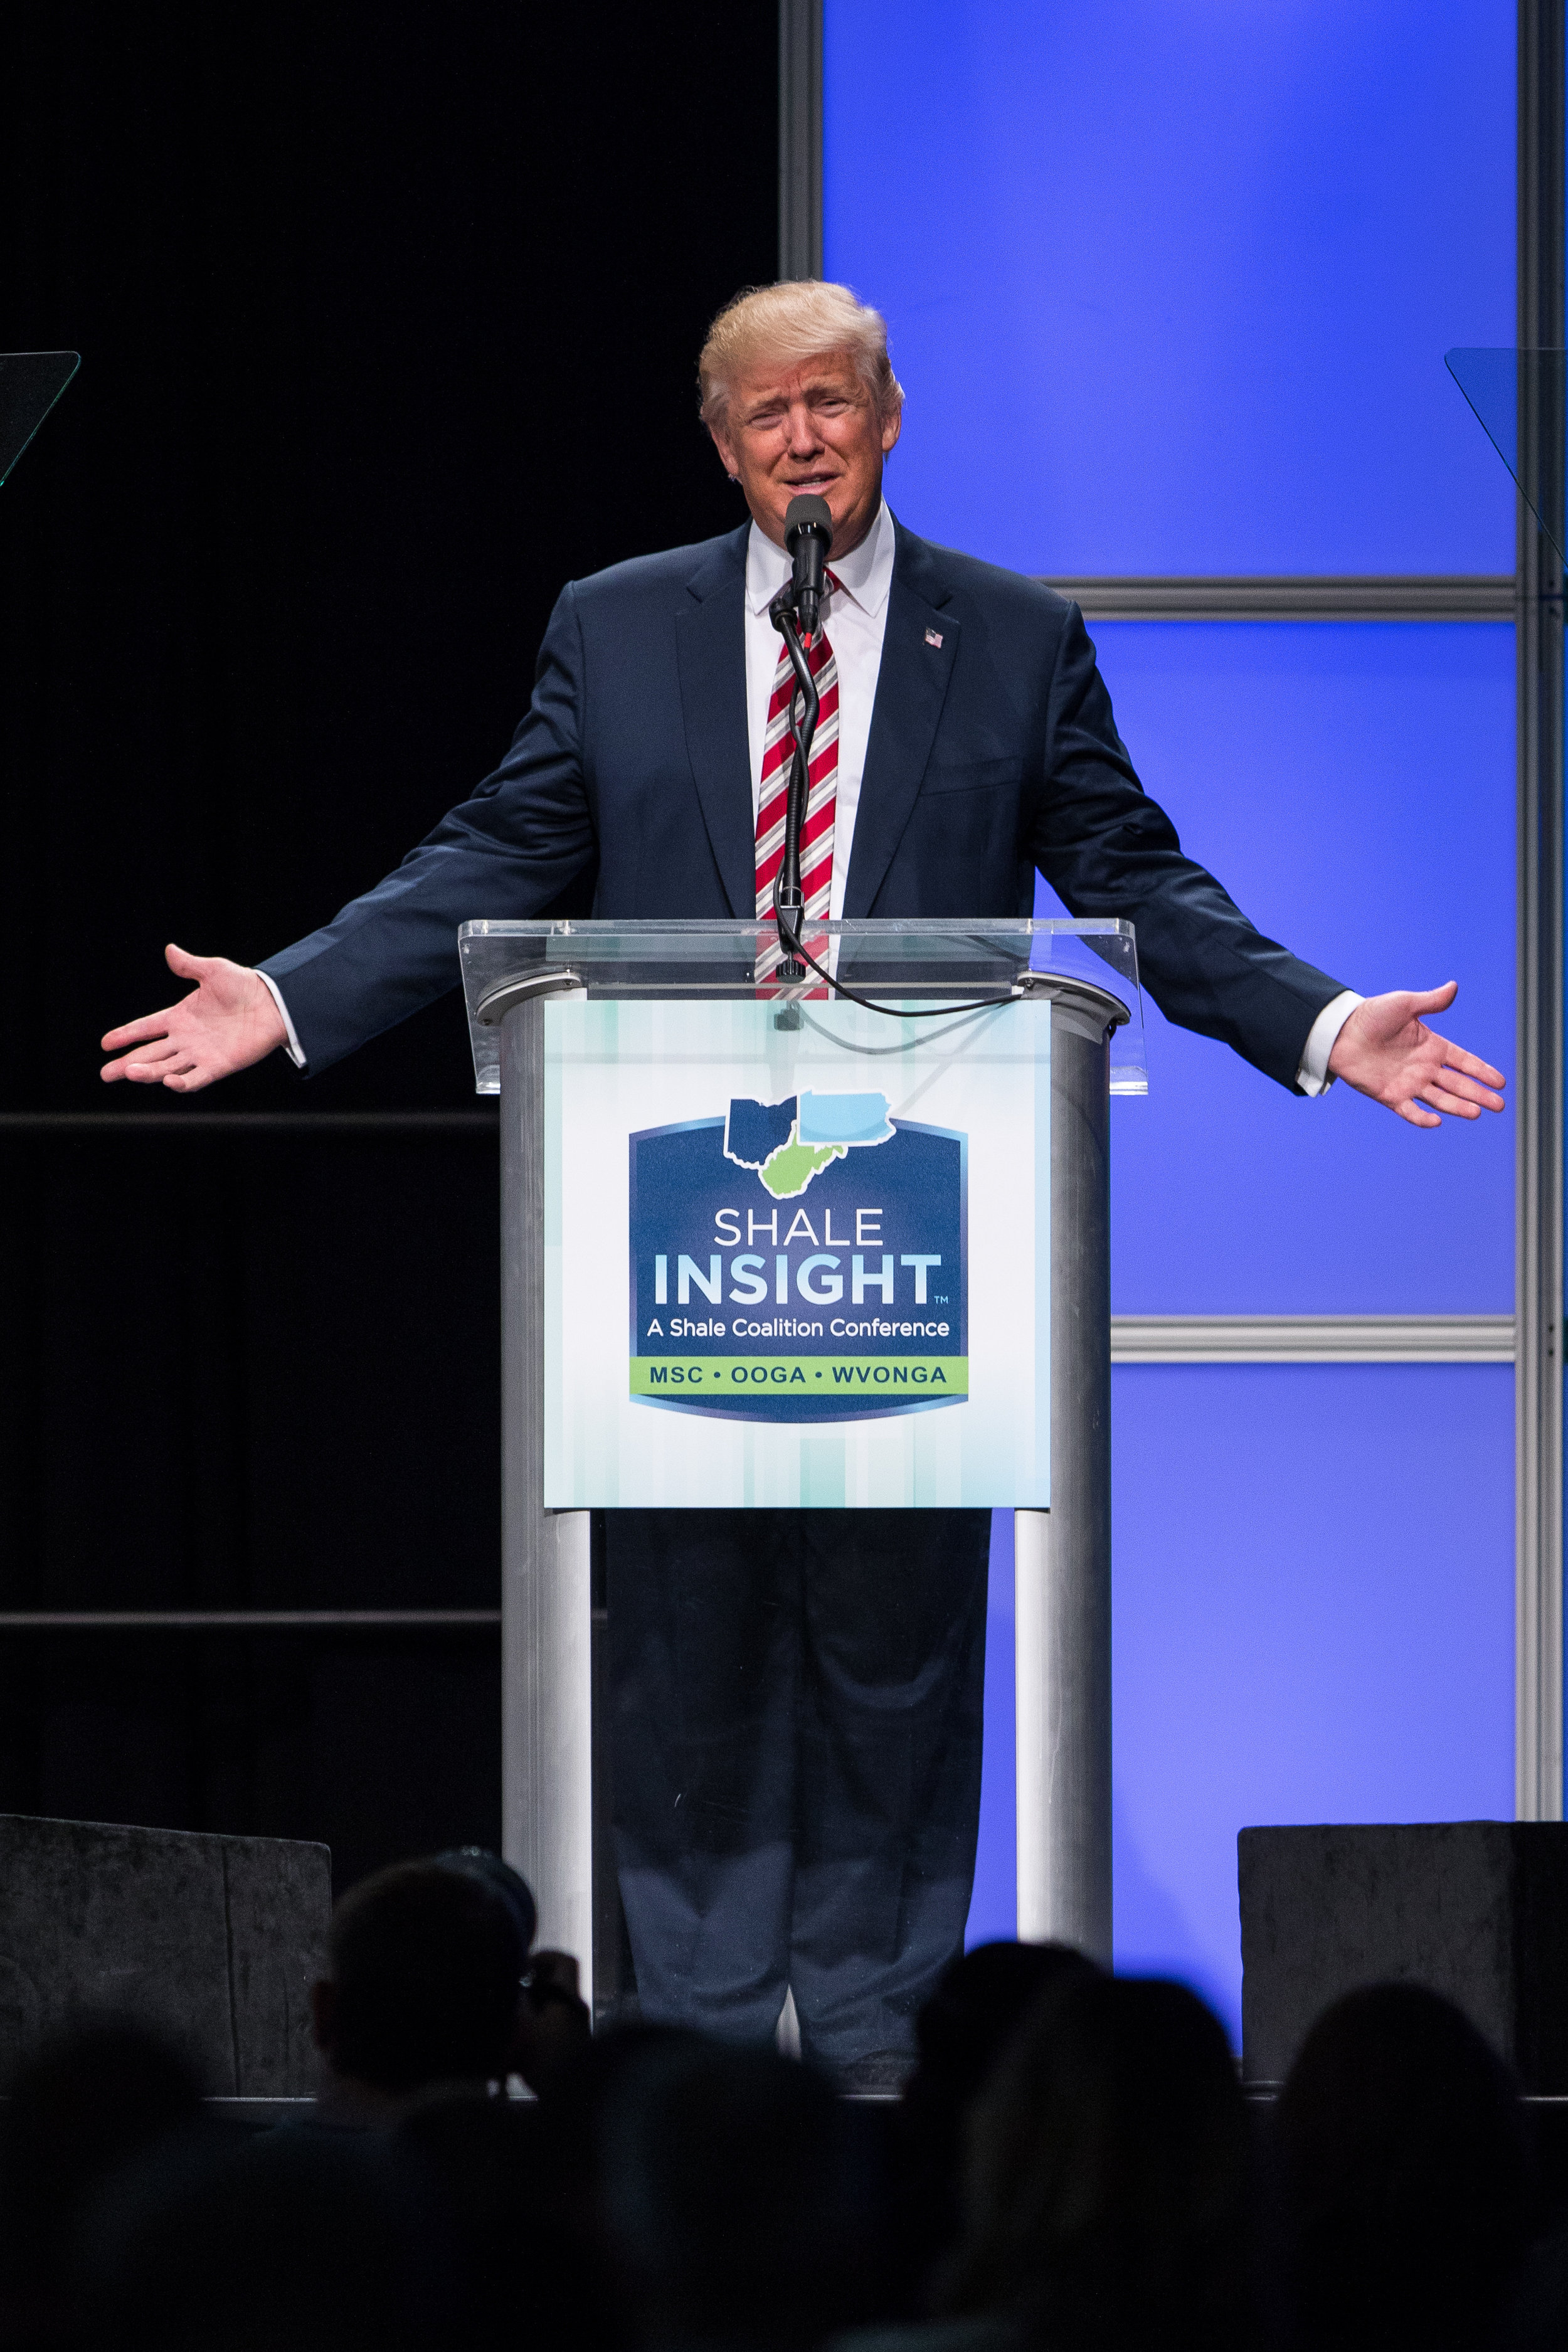  Republican Presidential Nominee Donald Trump speaks to a crowd of hundreds during his address at the Shale Insight conference at the David L Lawrence Convention Center in Pittsburgh on Thursday. Trump spoke about his positions on energy, national se